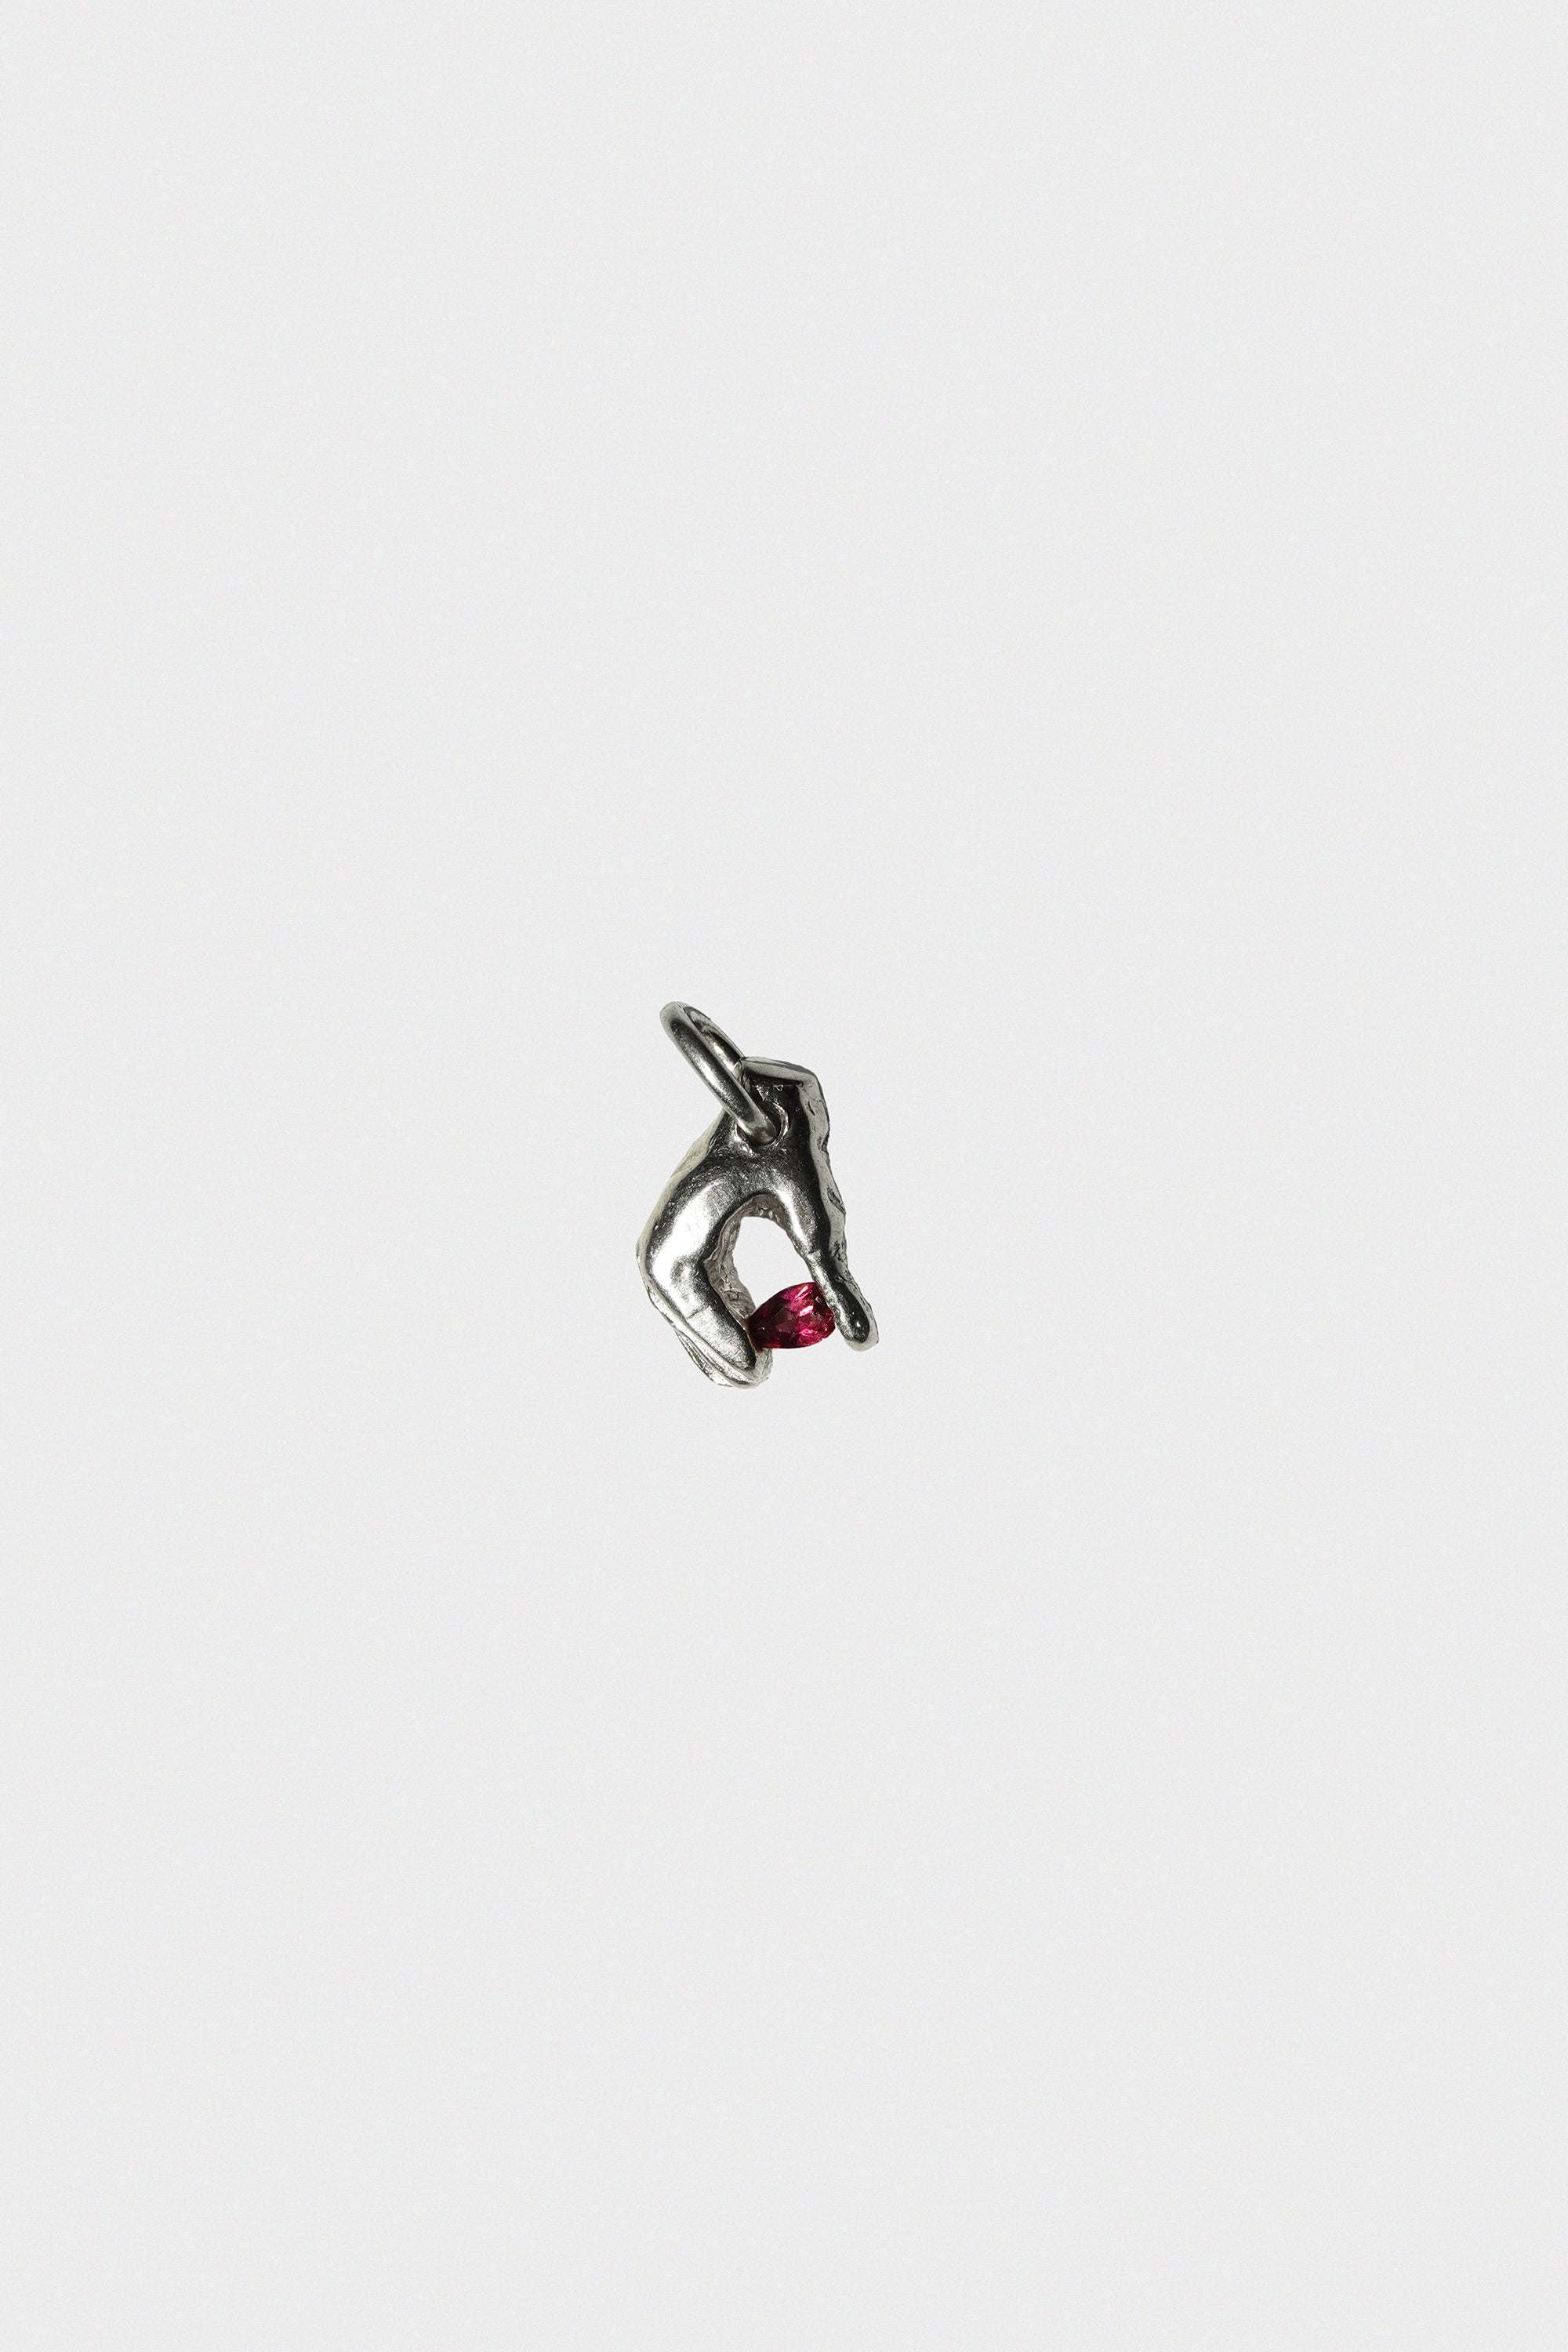 Squeeze Pendant in Sterling Silver & Garnet by Oxbow